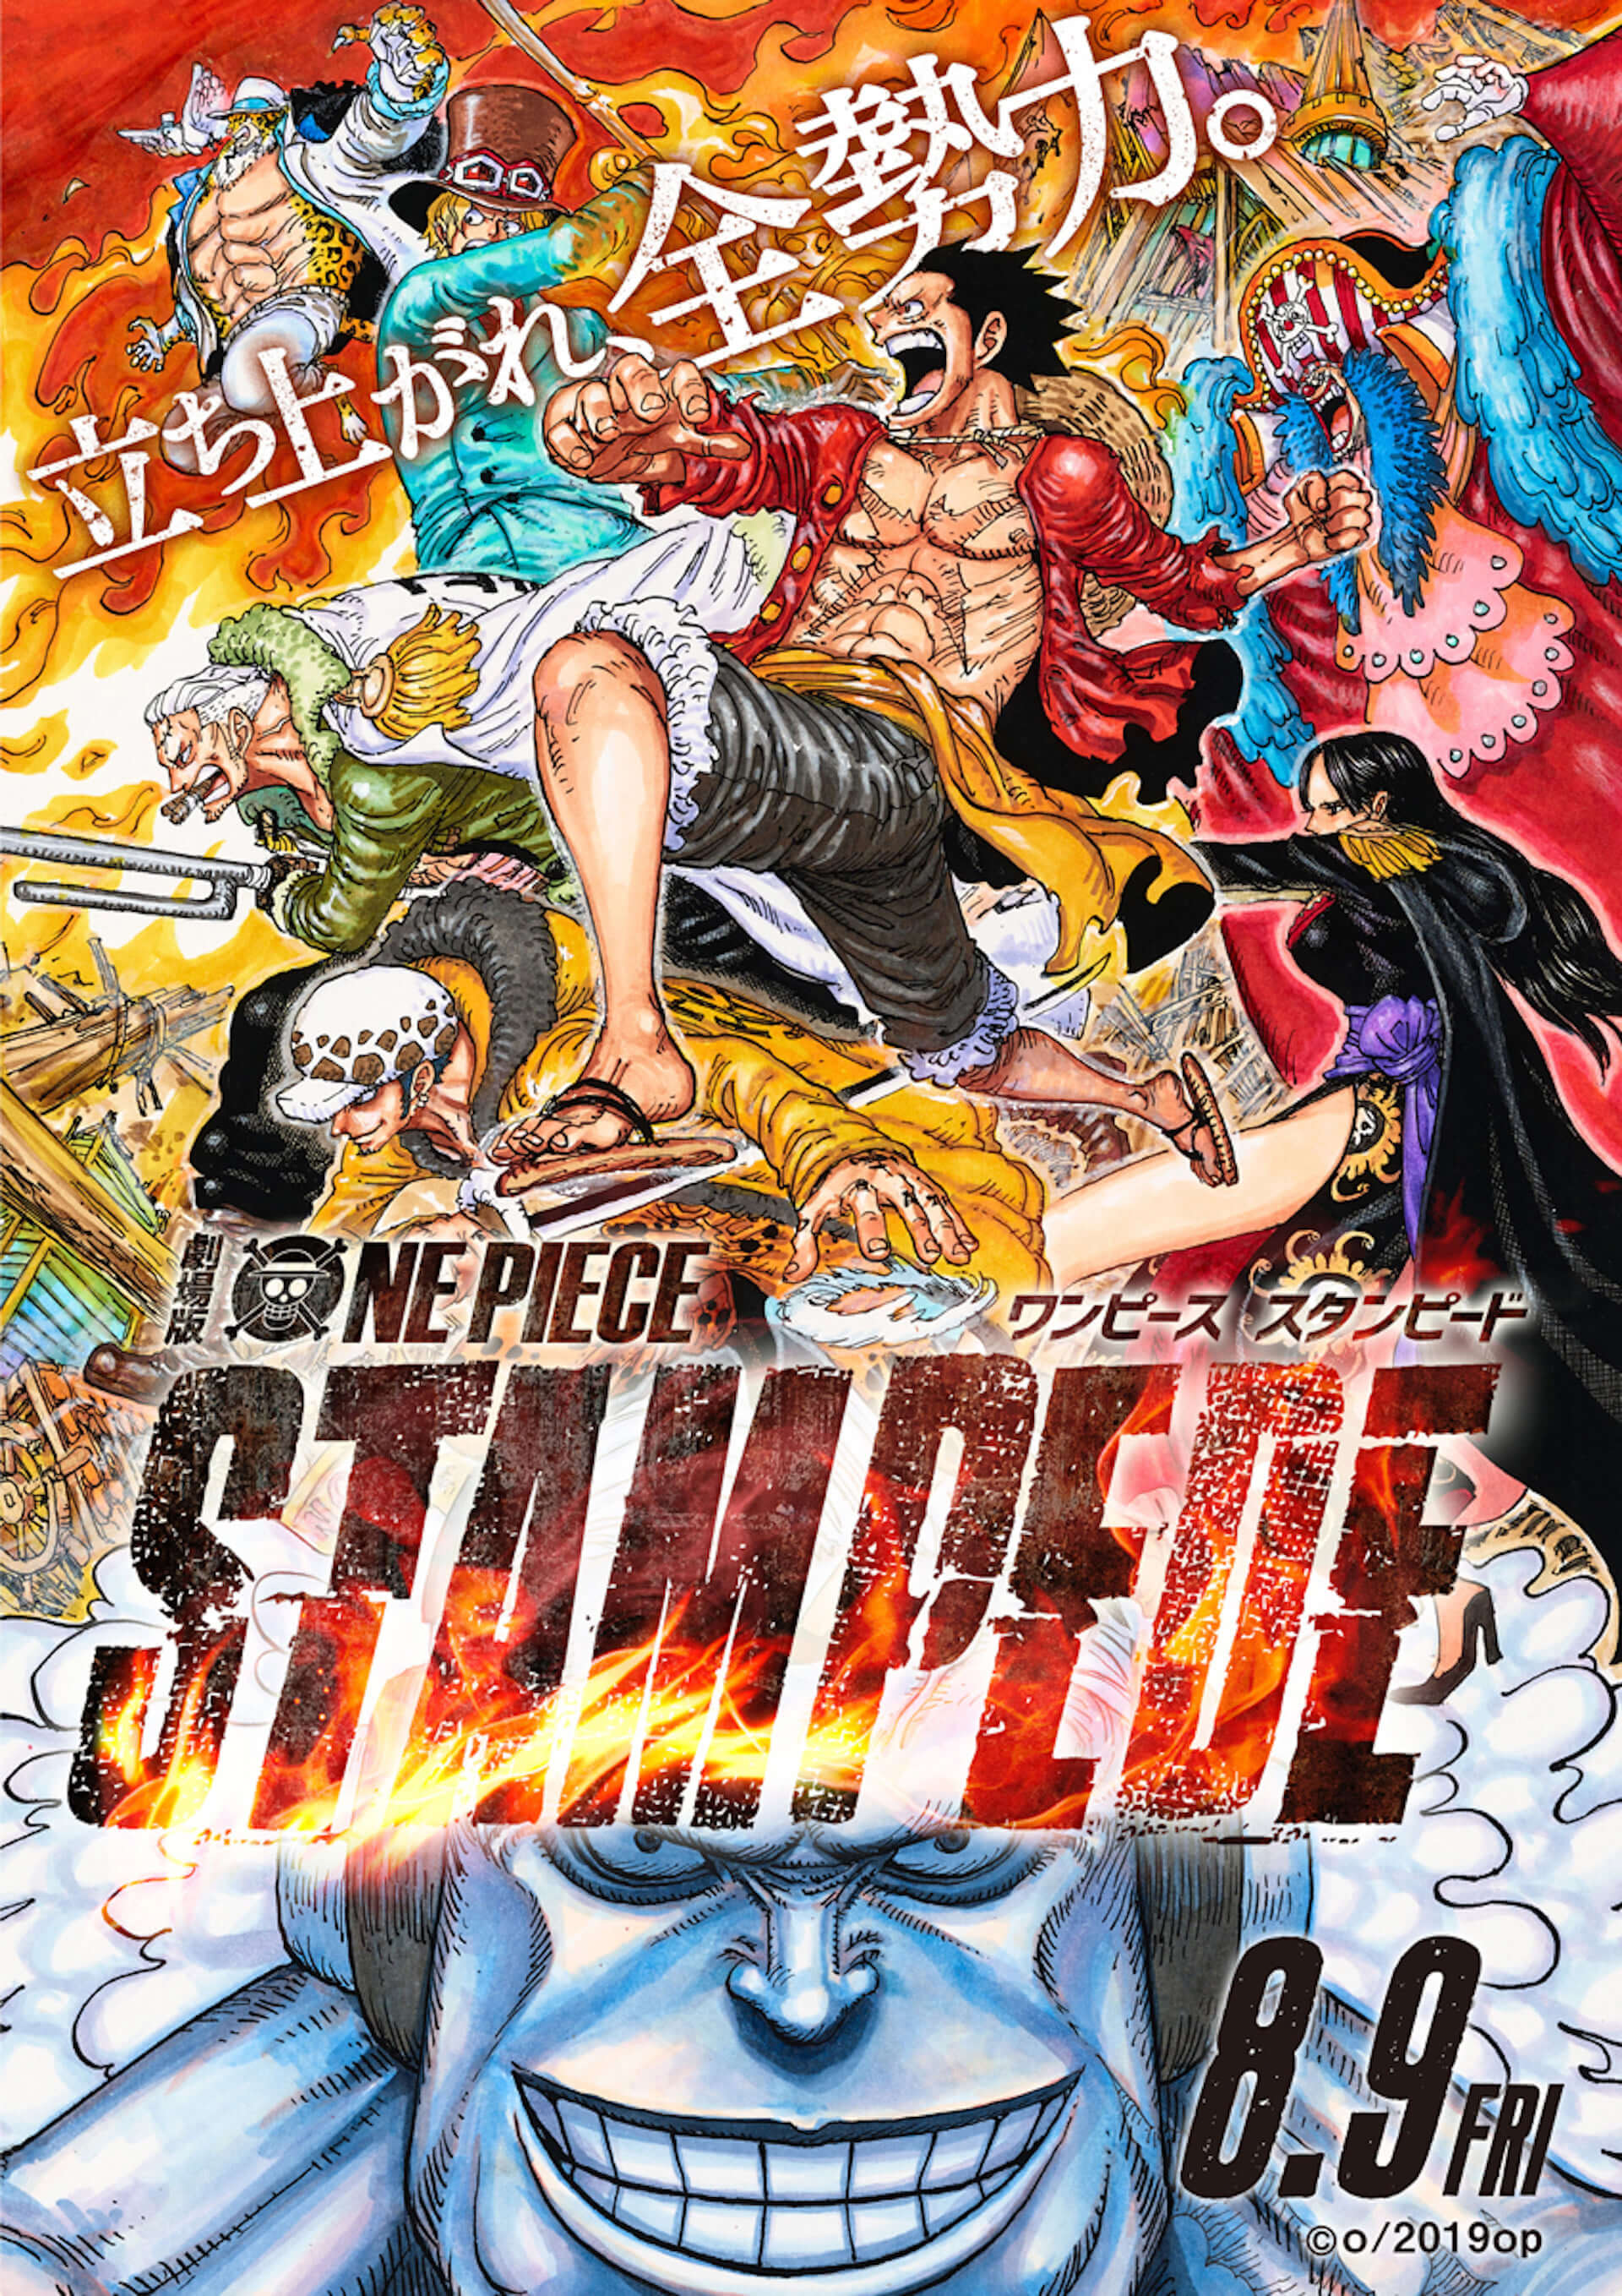 ONE PIECE「あと5年で終わりたい」フィッシャーズが原作者尾田栄一郎と奇跡の対面！ film190903_onepiece_fishers_1-1920x2717